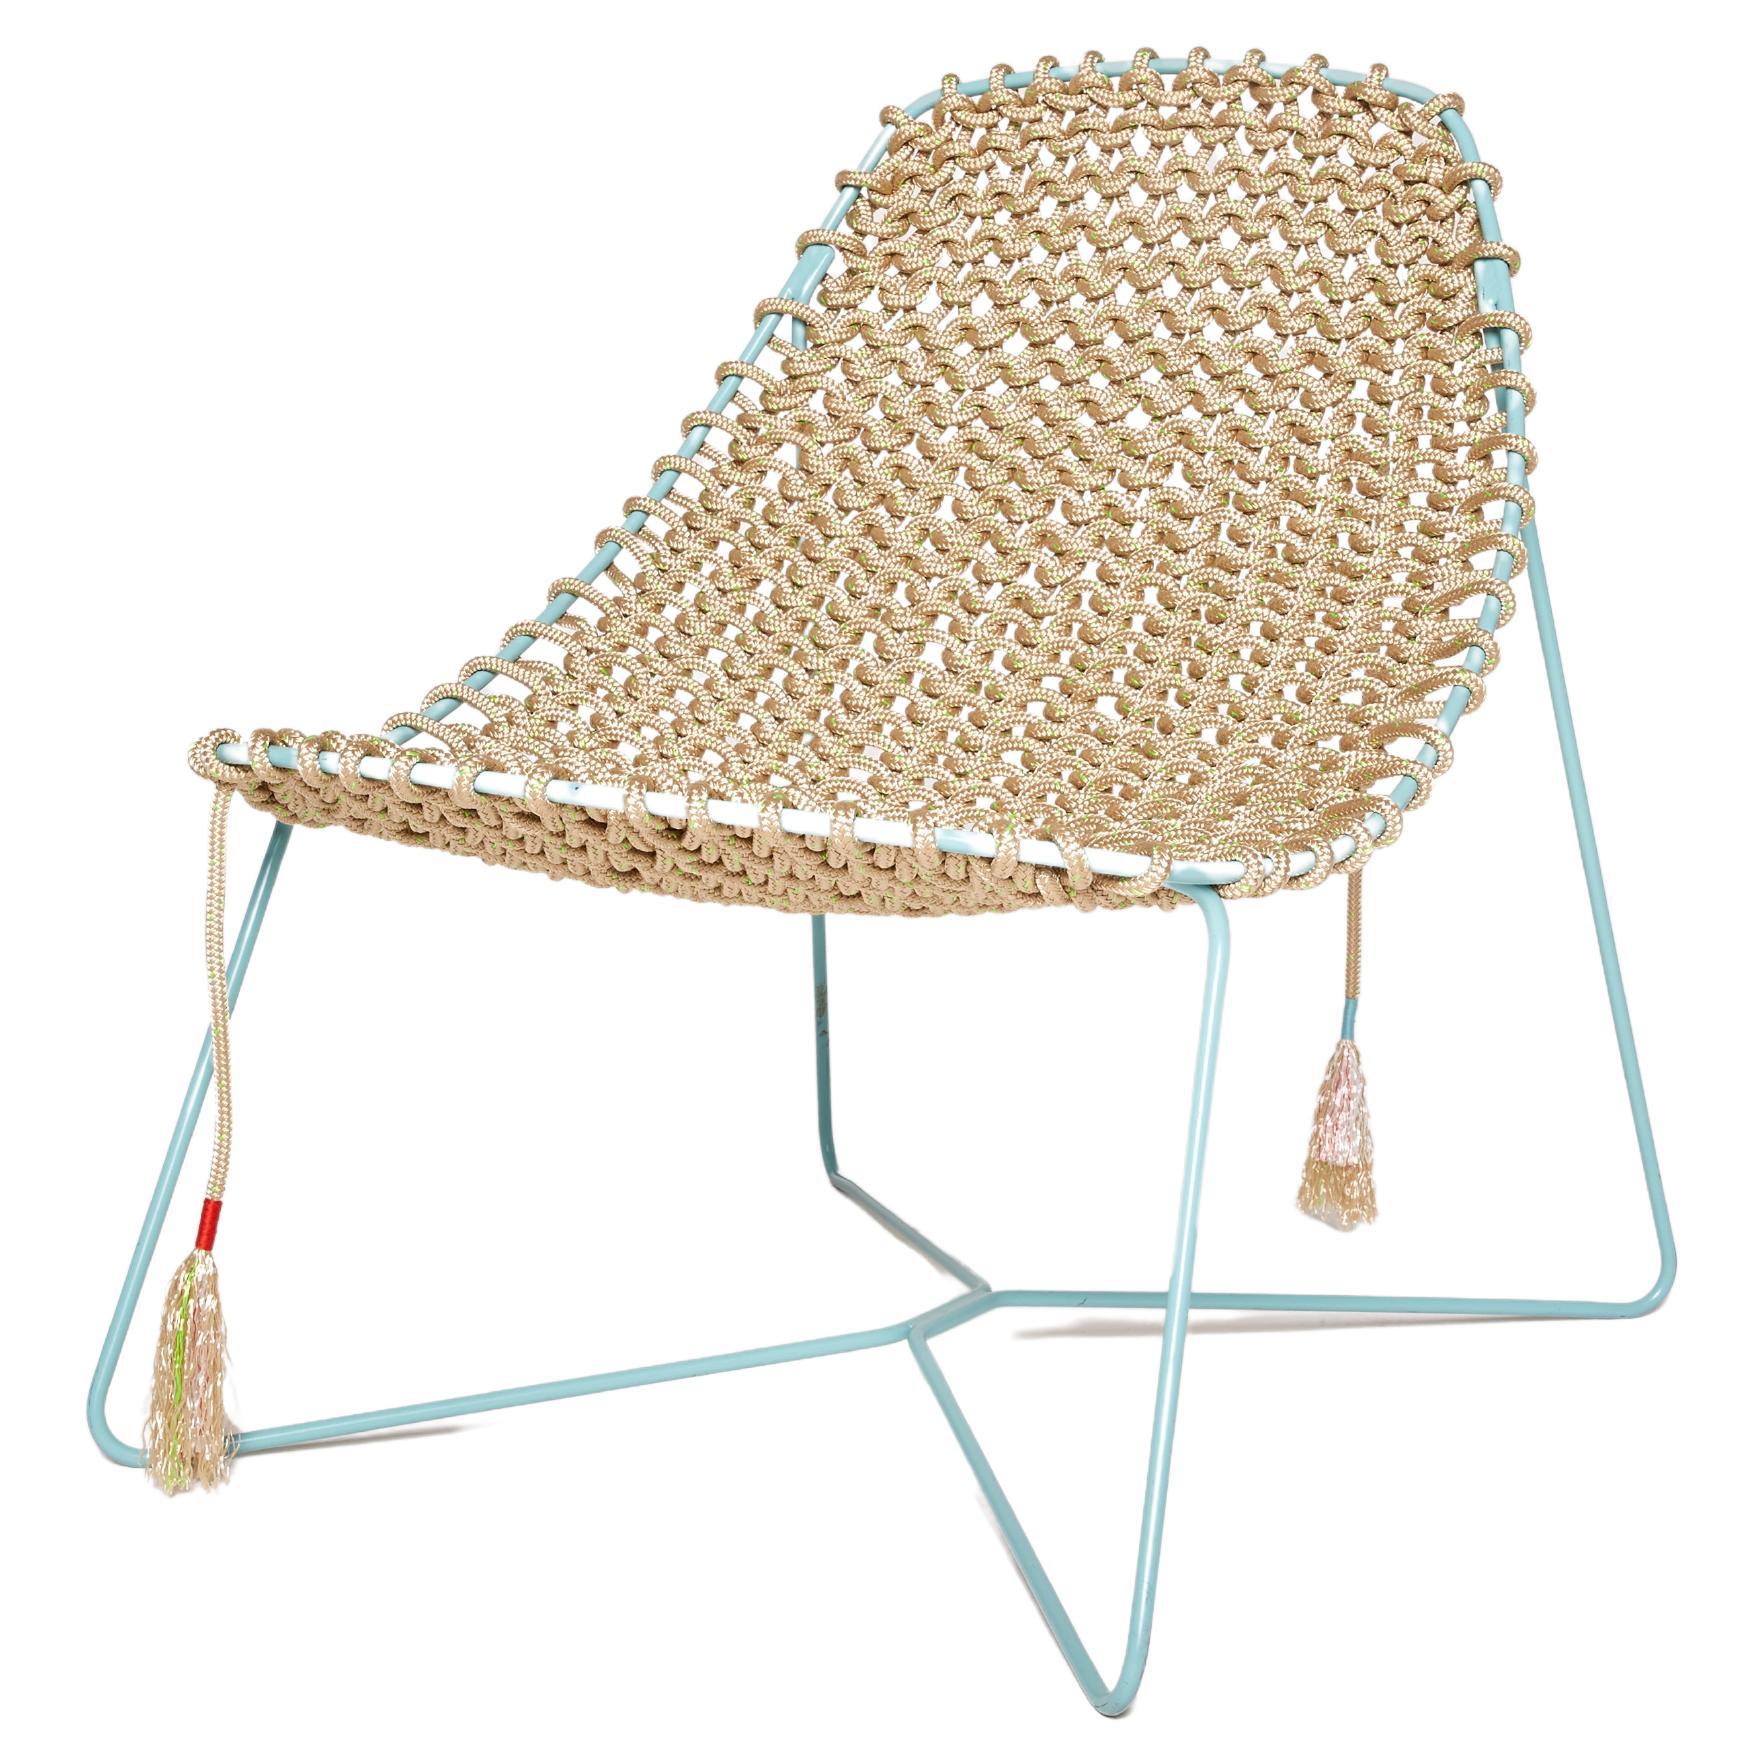 Award nominated beige hand knitted lounger with blue frame by hettler.tüllmann